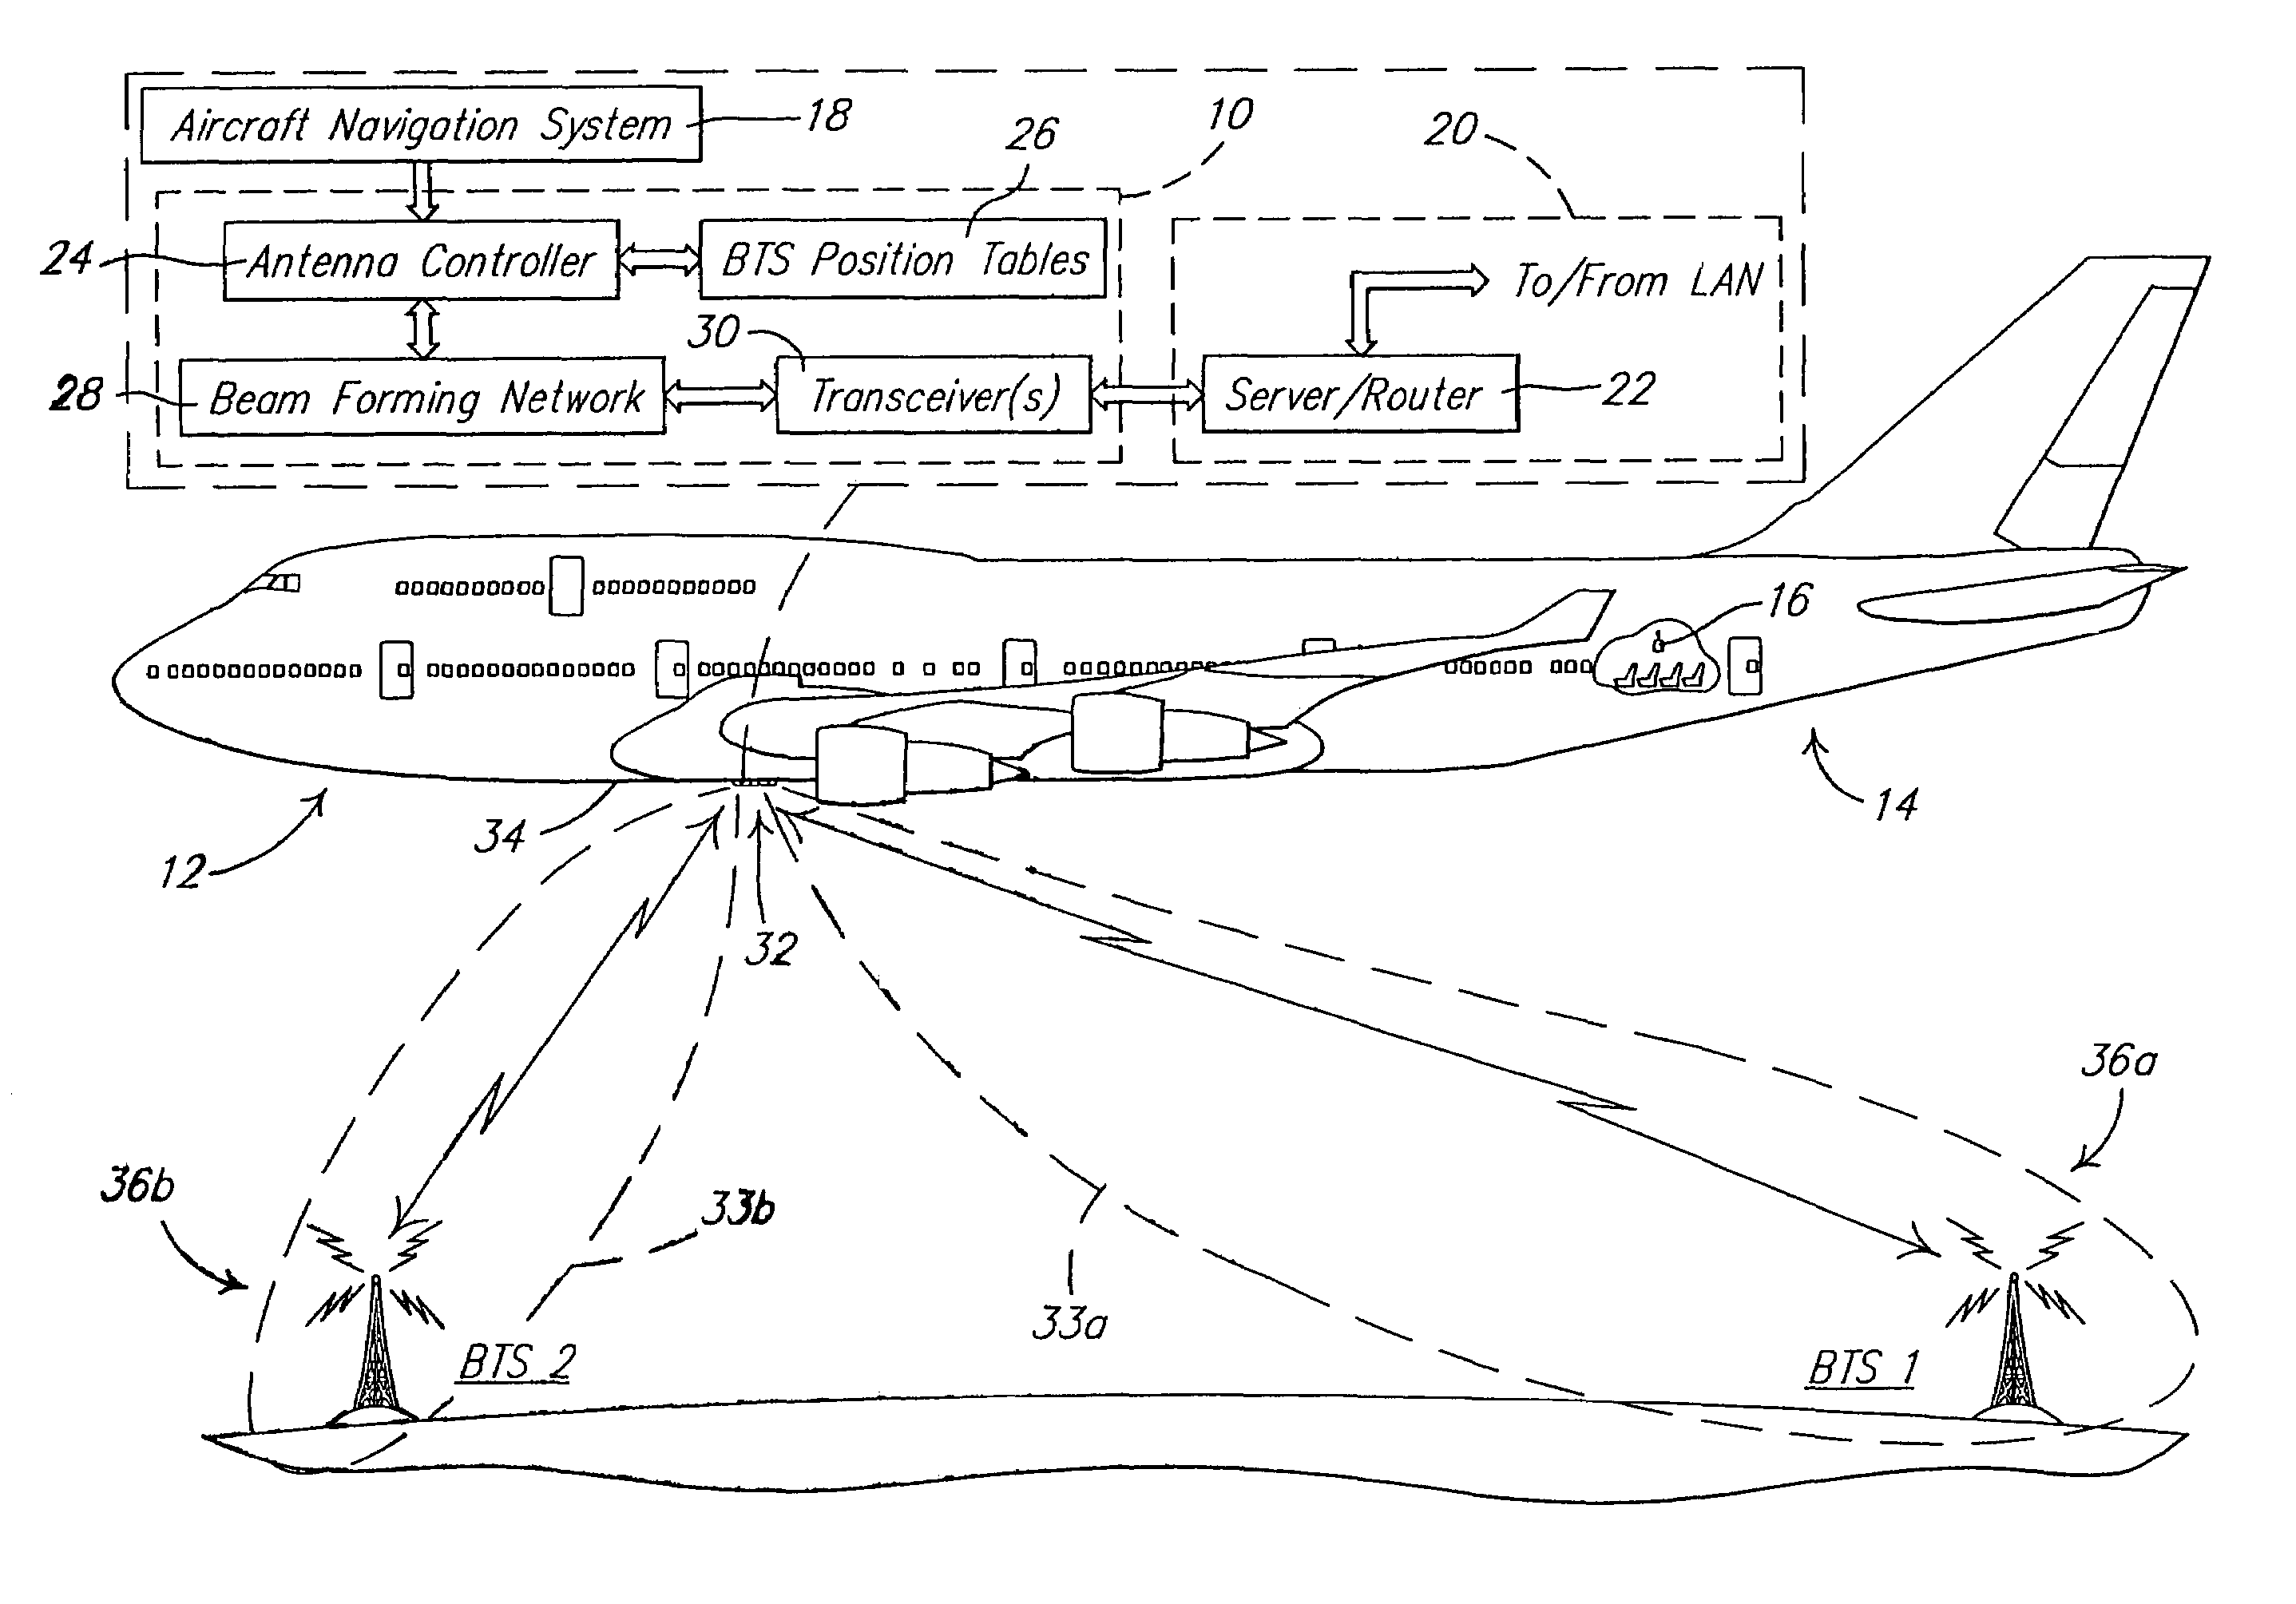 Point-to-multipoint communications system and method